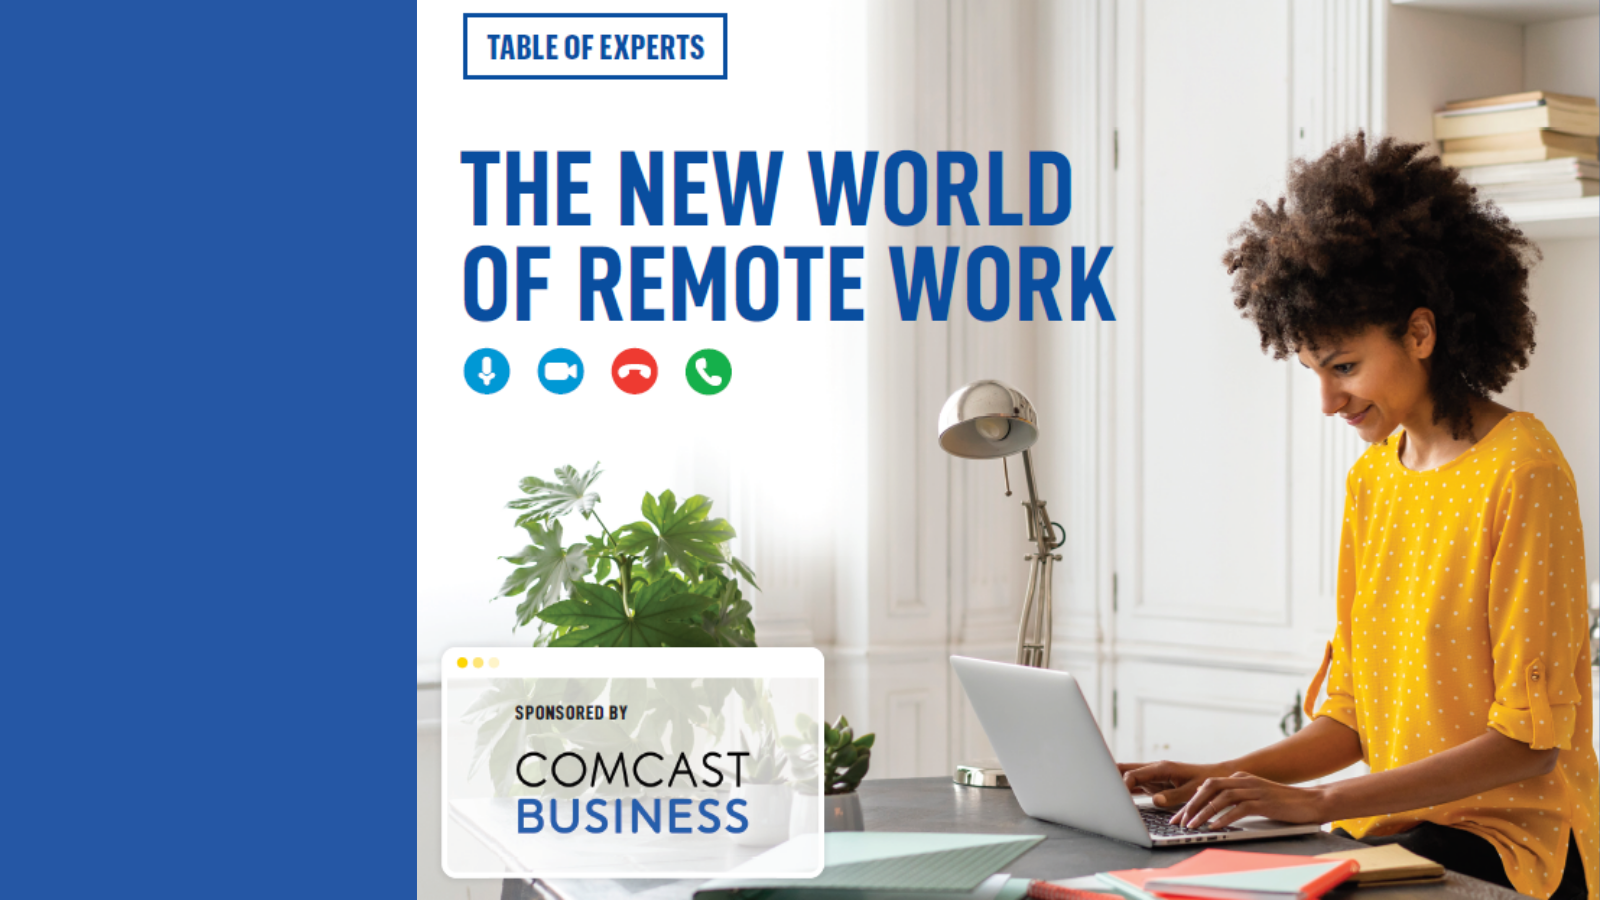 What Experts Say About Remote Work